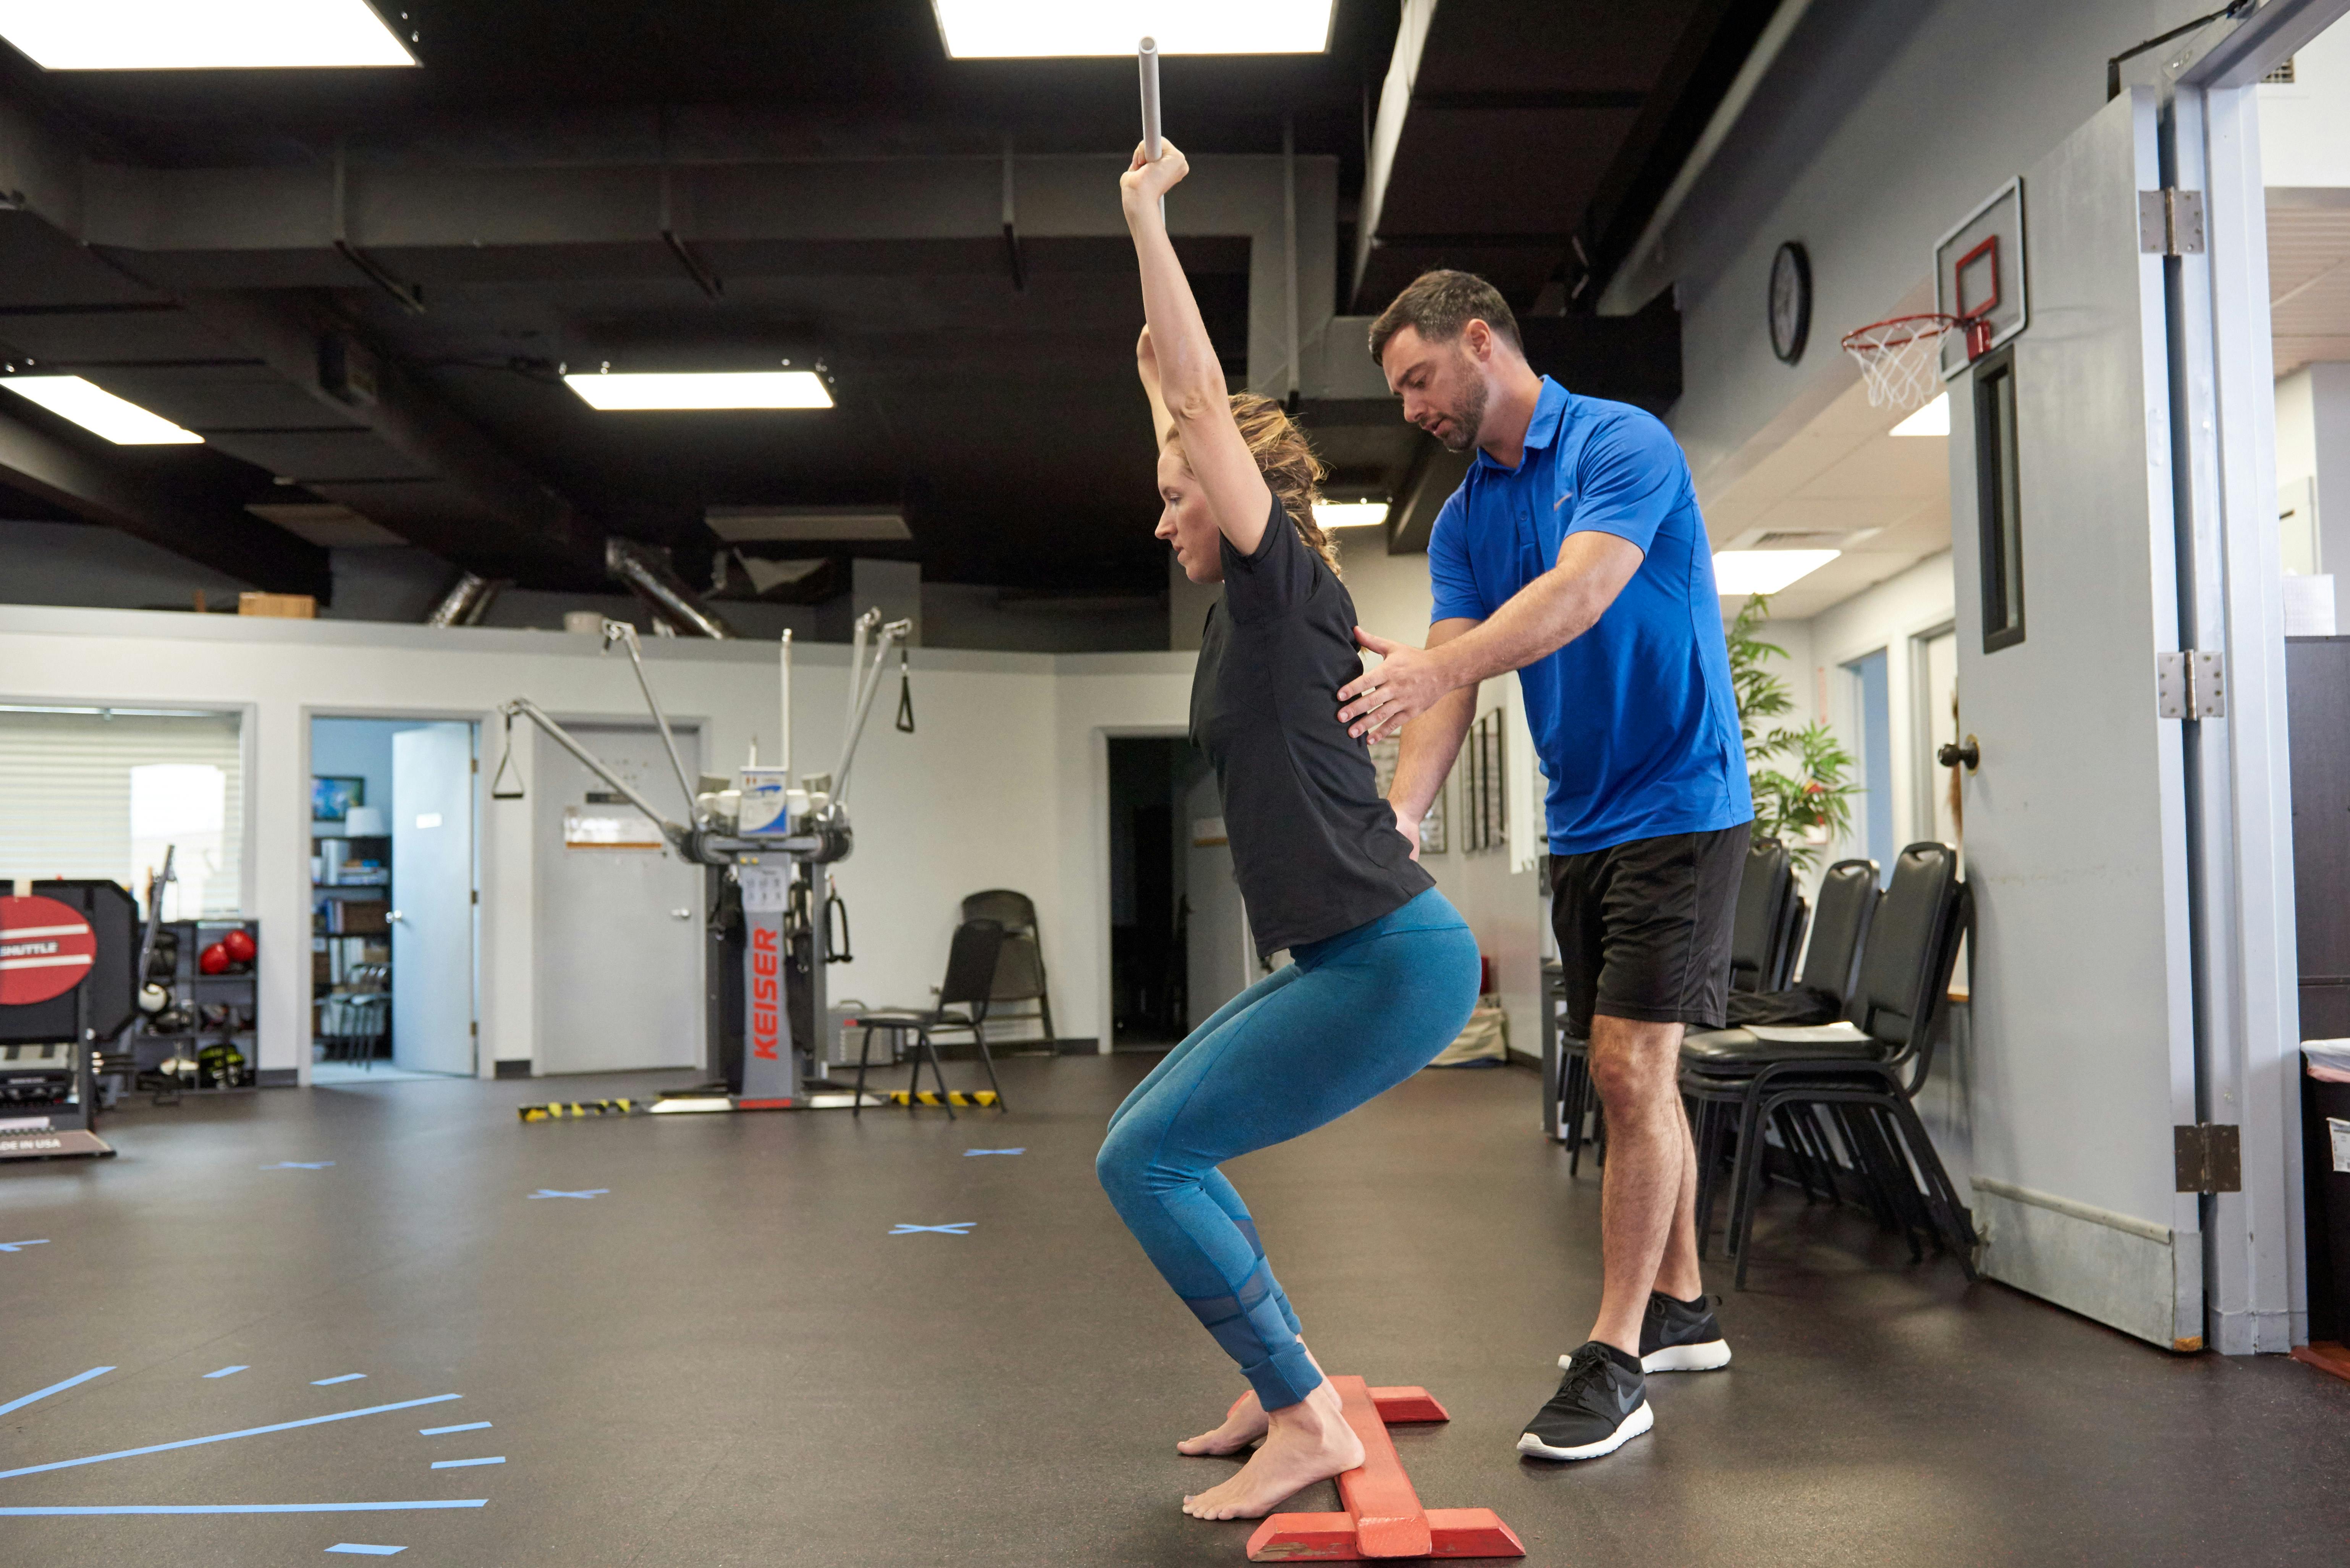 What is functional training anway? - The Fit Stop